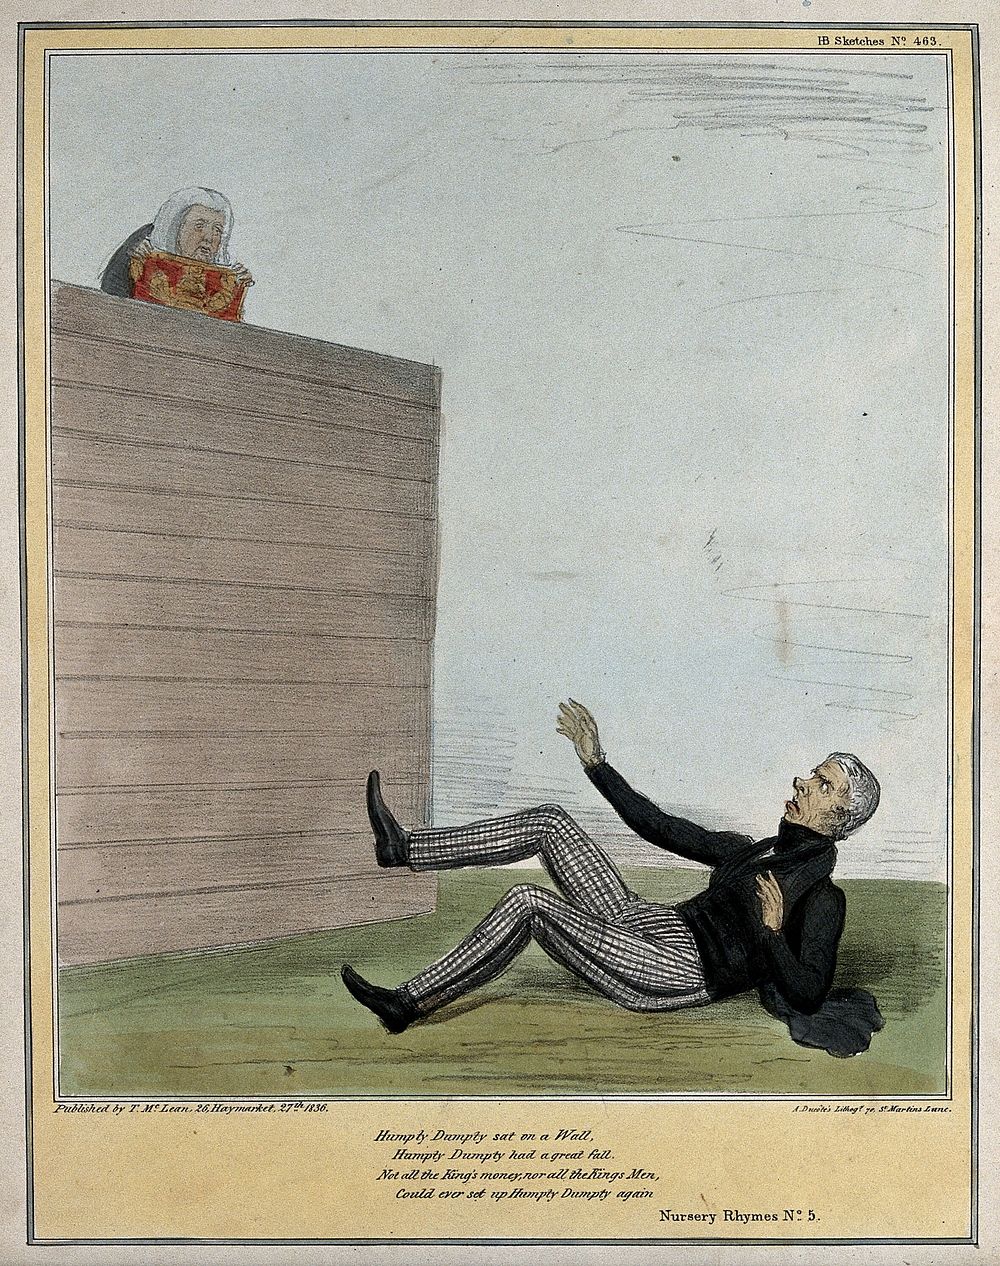 Behind a high wall is the bewigged figure of Lord Cottenham, below on his back, as if having fallen, is Lord Brougham.…